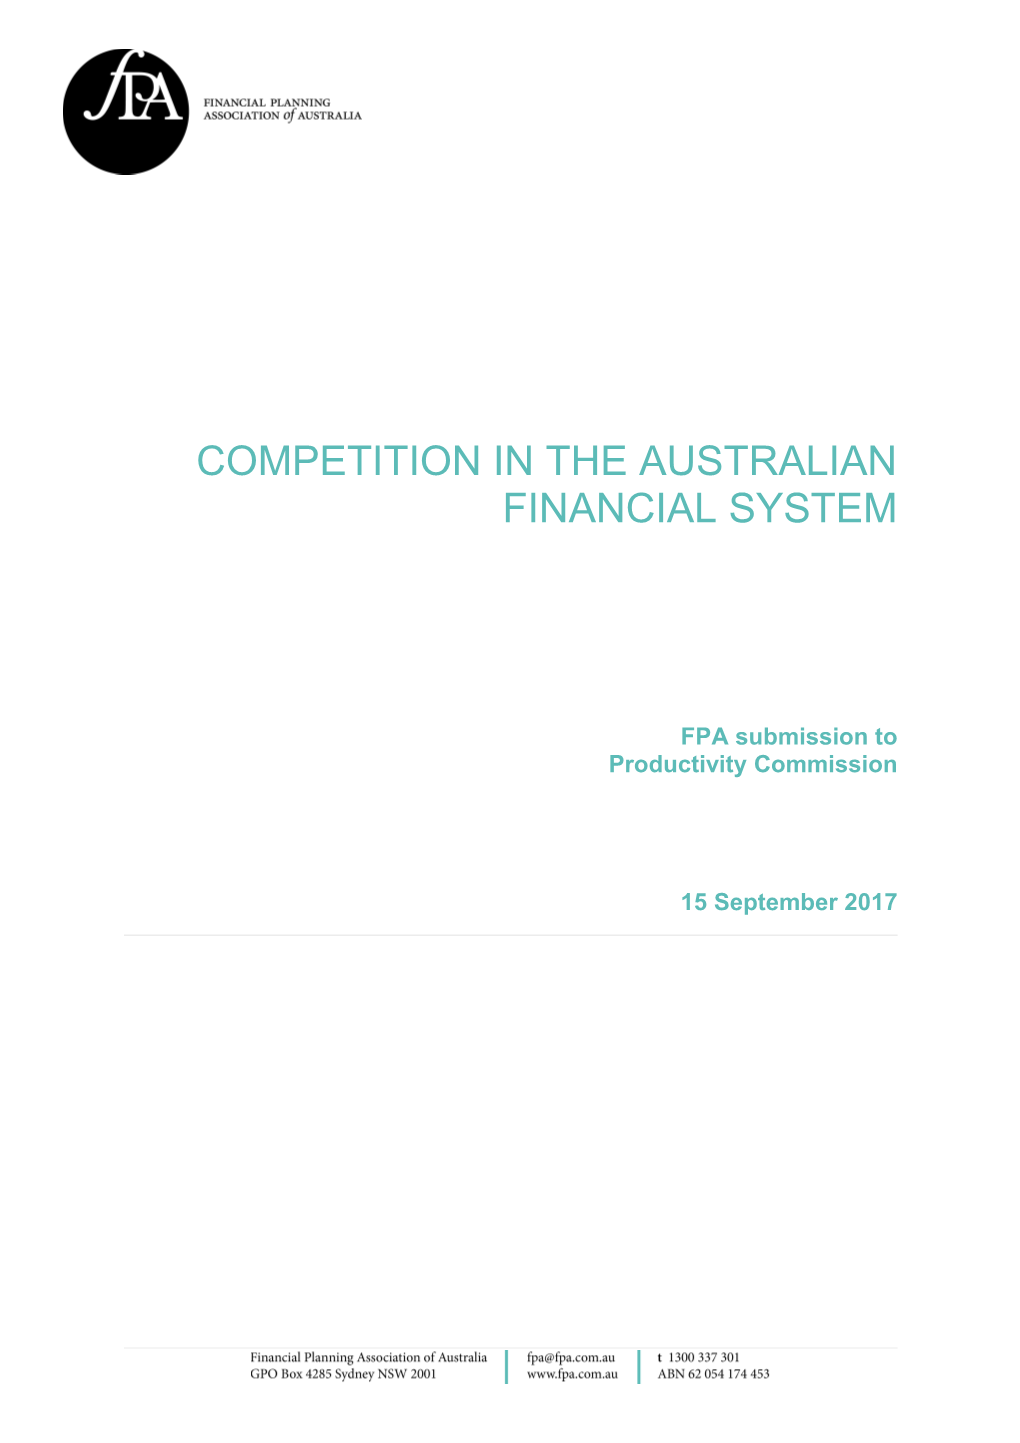 Submission 26 - Financial Planning Association of Australia (FPA) - Competition in The